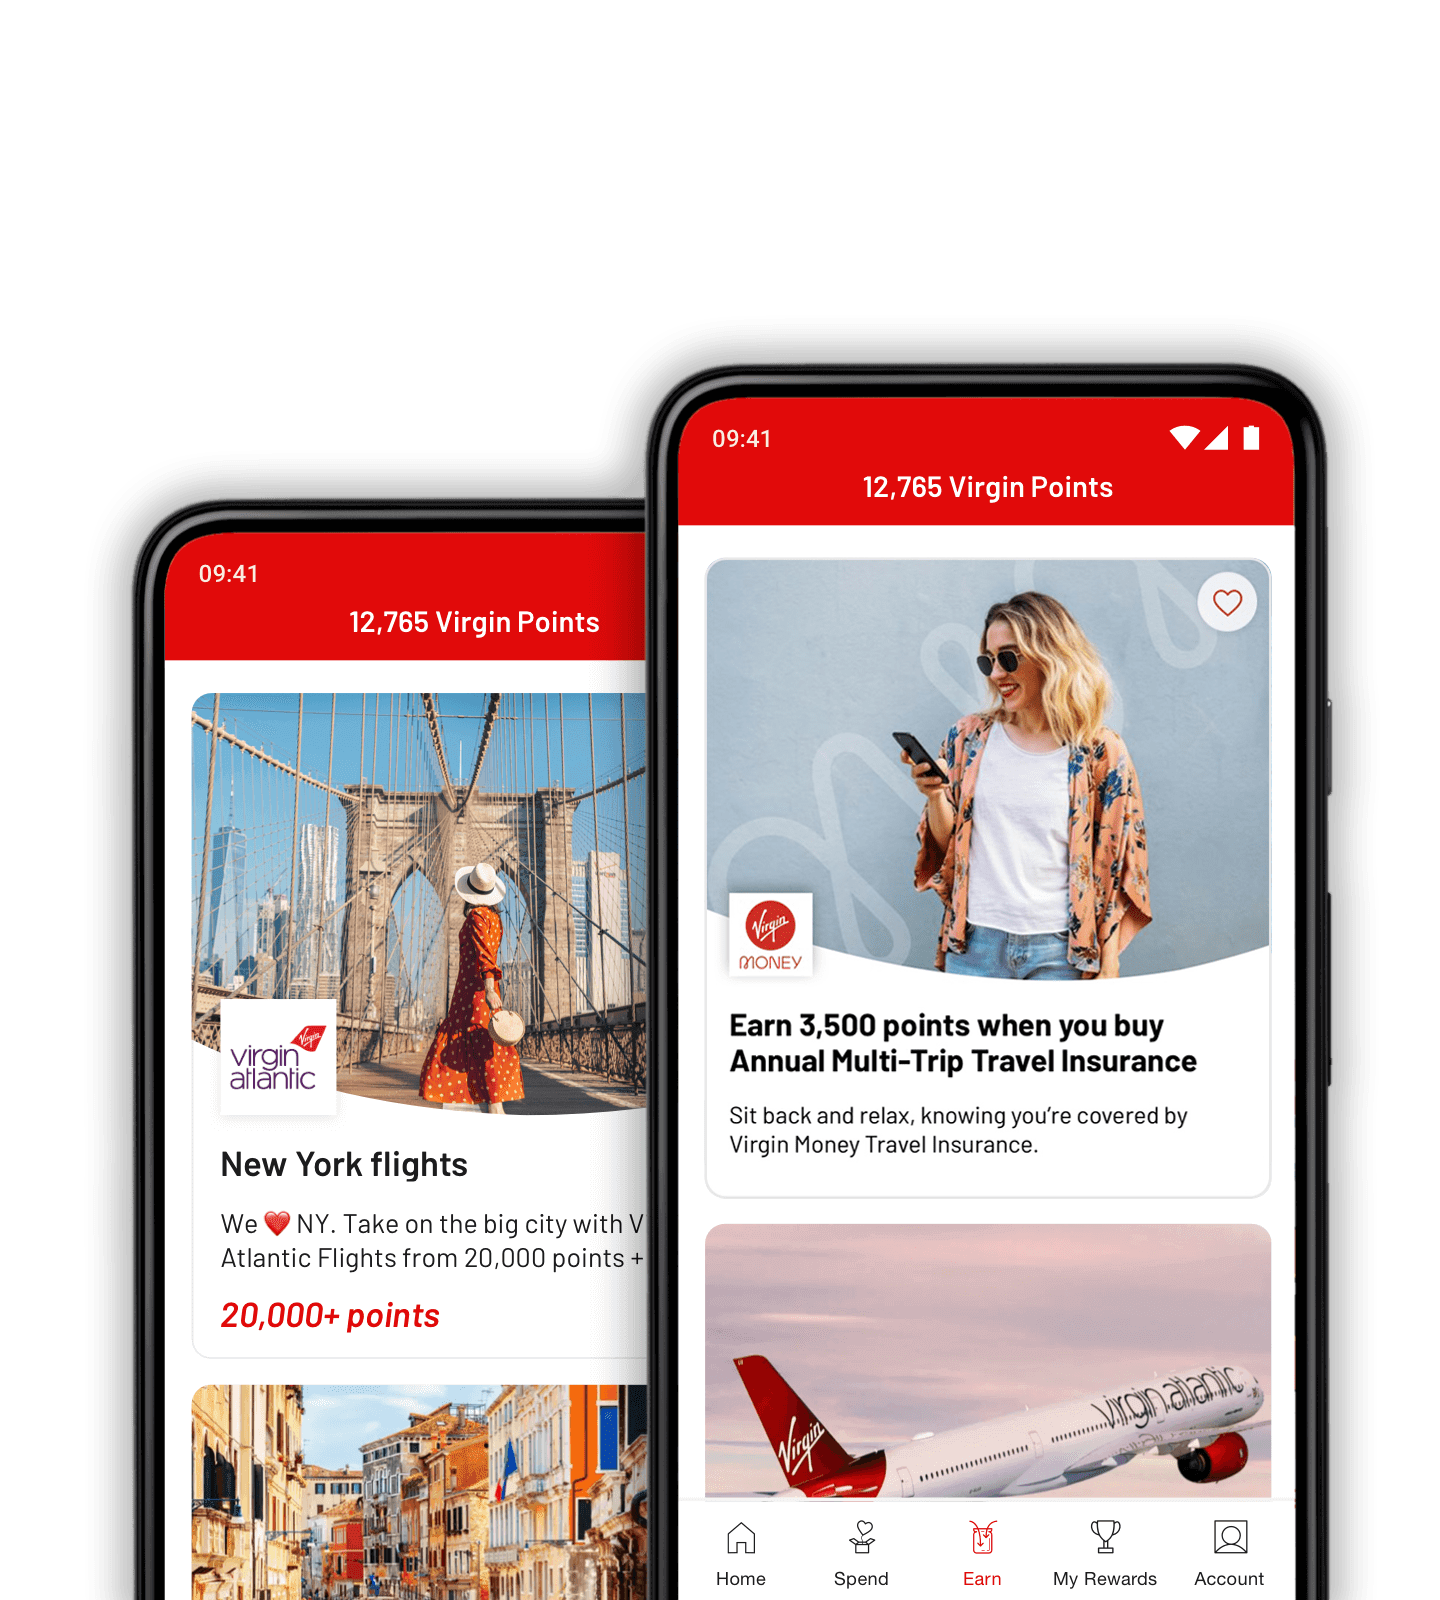 Two phones showing Virgin Red rewards which say "new york flights, we heart NY take on the big city with virgin atlantic flights from 20,000 points +" and "Earn 35,00 points when you buys annual multi-trip travel insurance, sit back and relax, knowing you're covered by virgin money travel insurance".